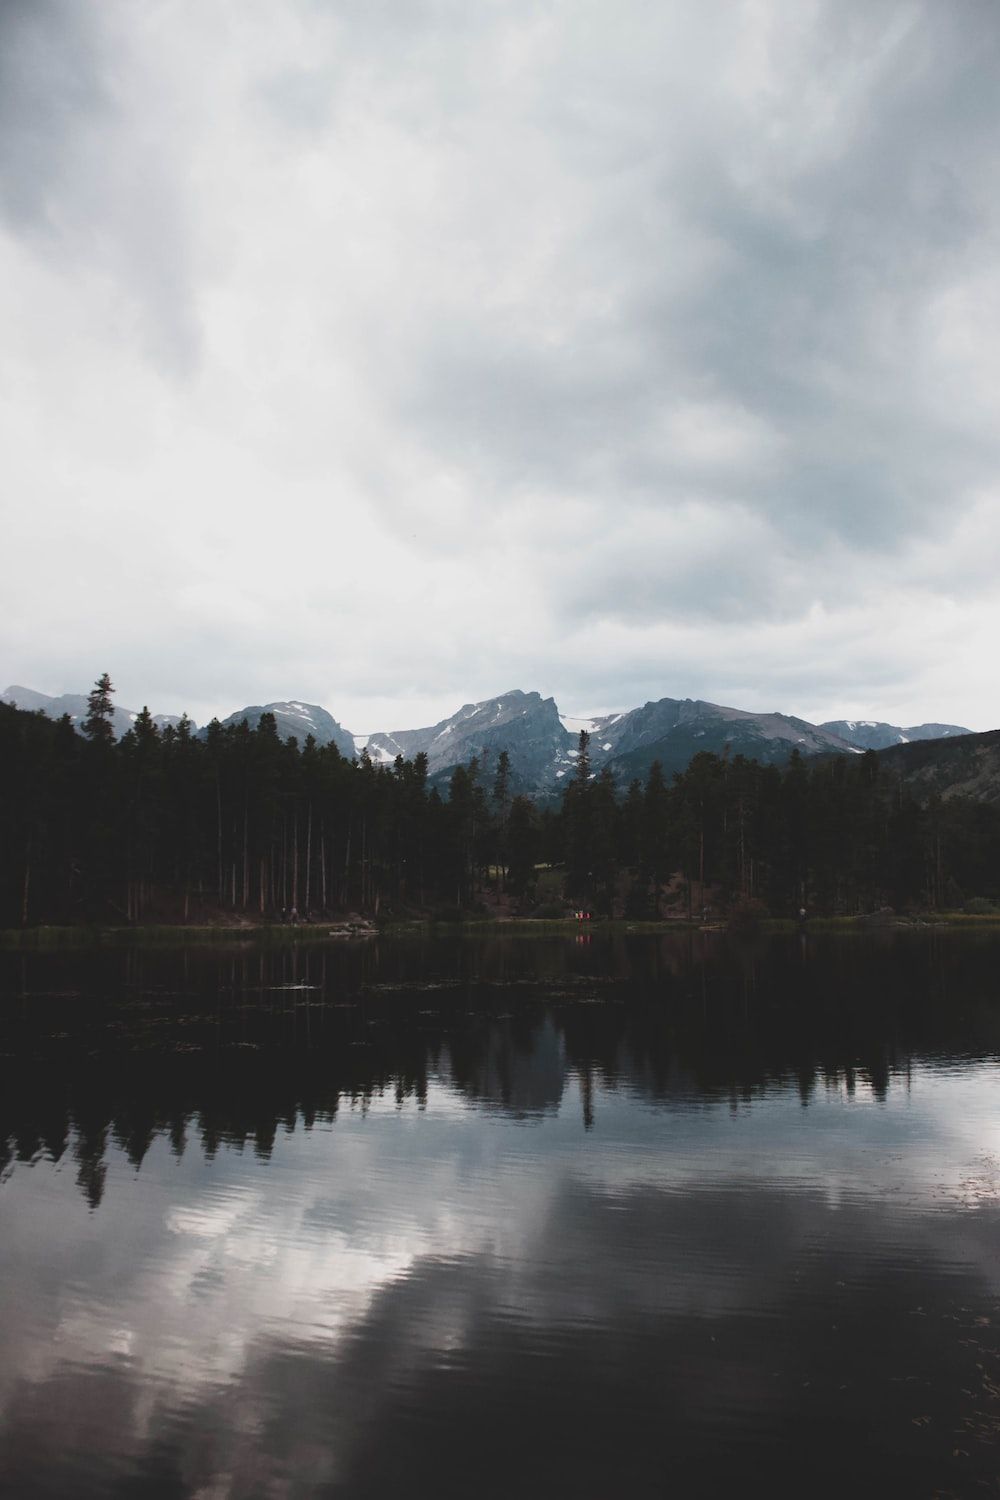 A cloudy sky reflects in a lake surrounded by trees and mountains in the background. - Lake